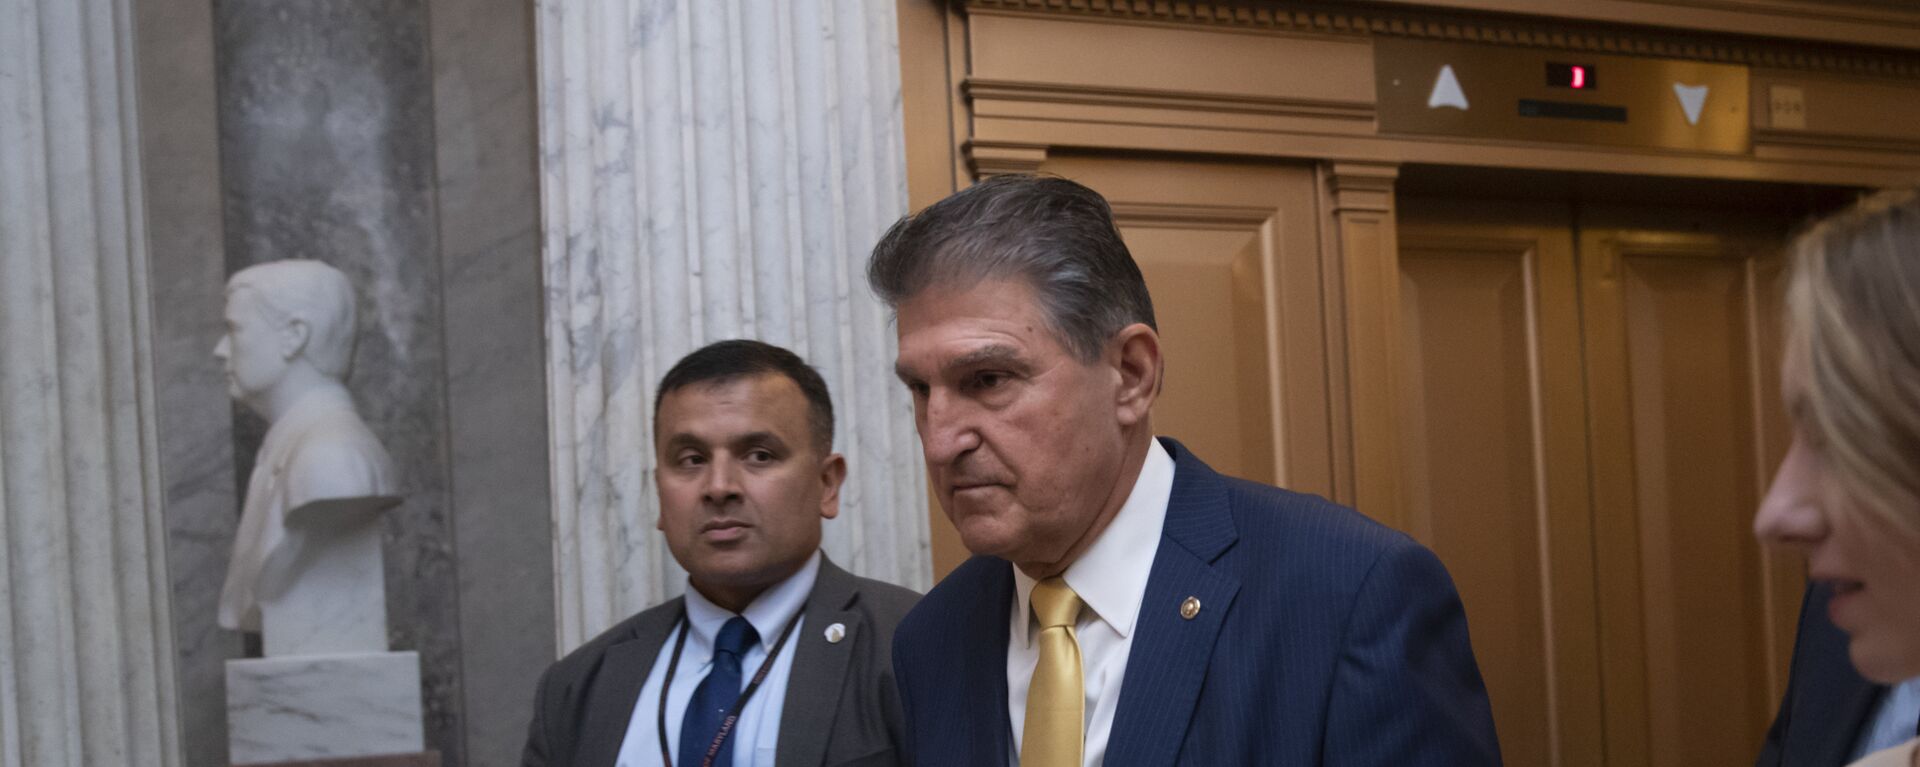 Sen. Joe Manchin, D-W.Va., arrives at the chamber for a procedural vote to advance the confirmation of Supreme Court nominee Brett Kavanaugh, at the Capitol in Washington, Friday, Oct. 5, 2018.  - Sputnik International, 1920, 11.11.2021